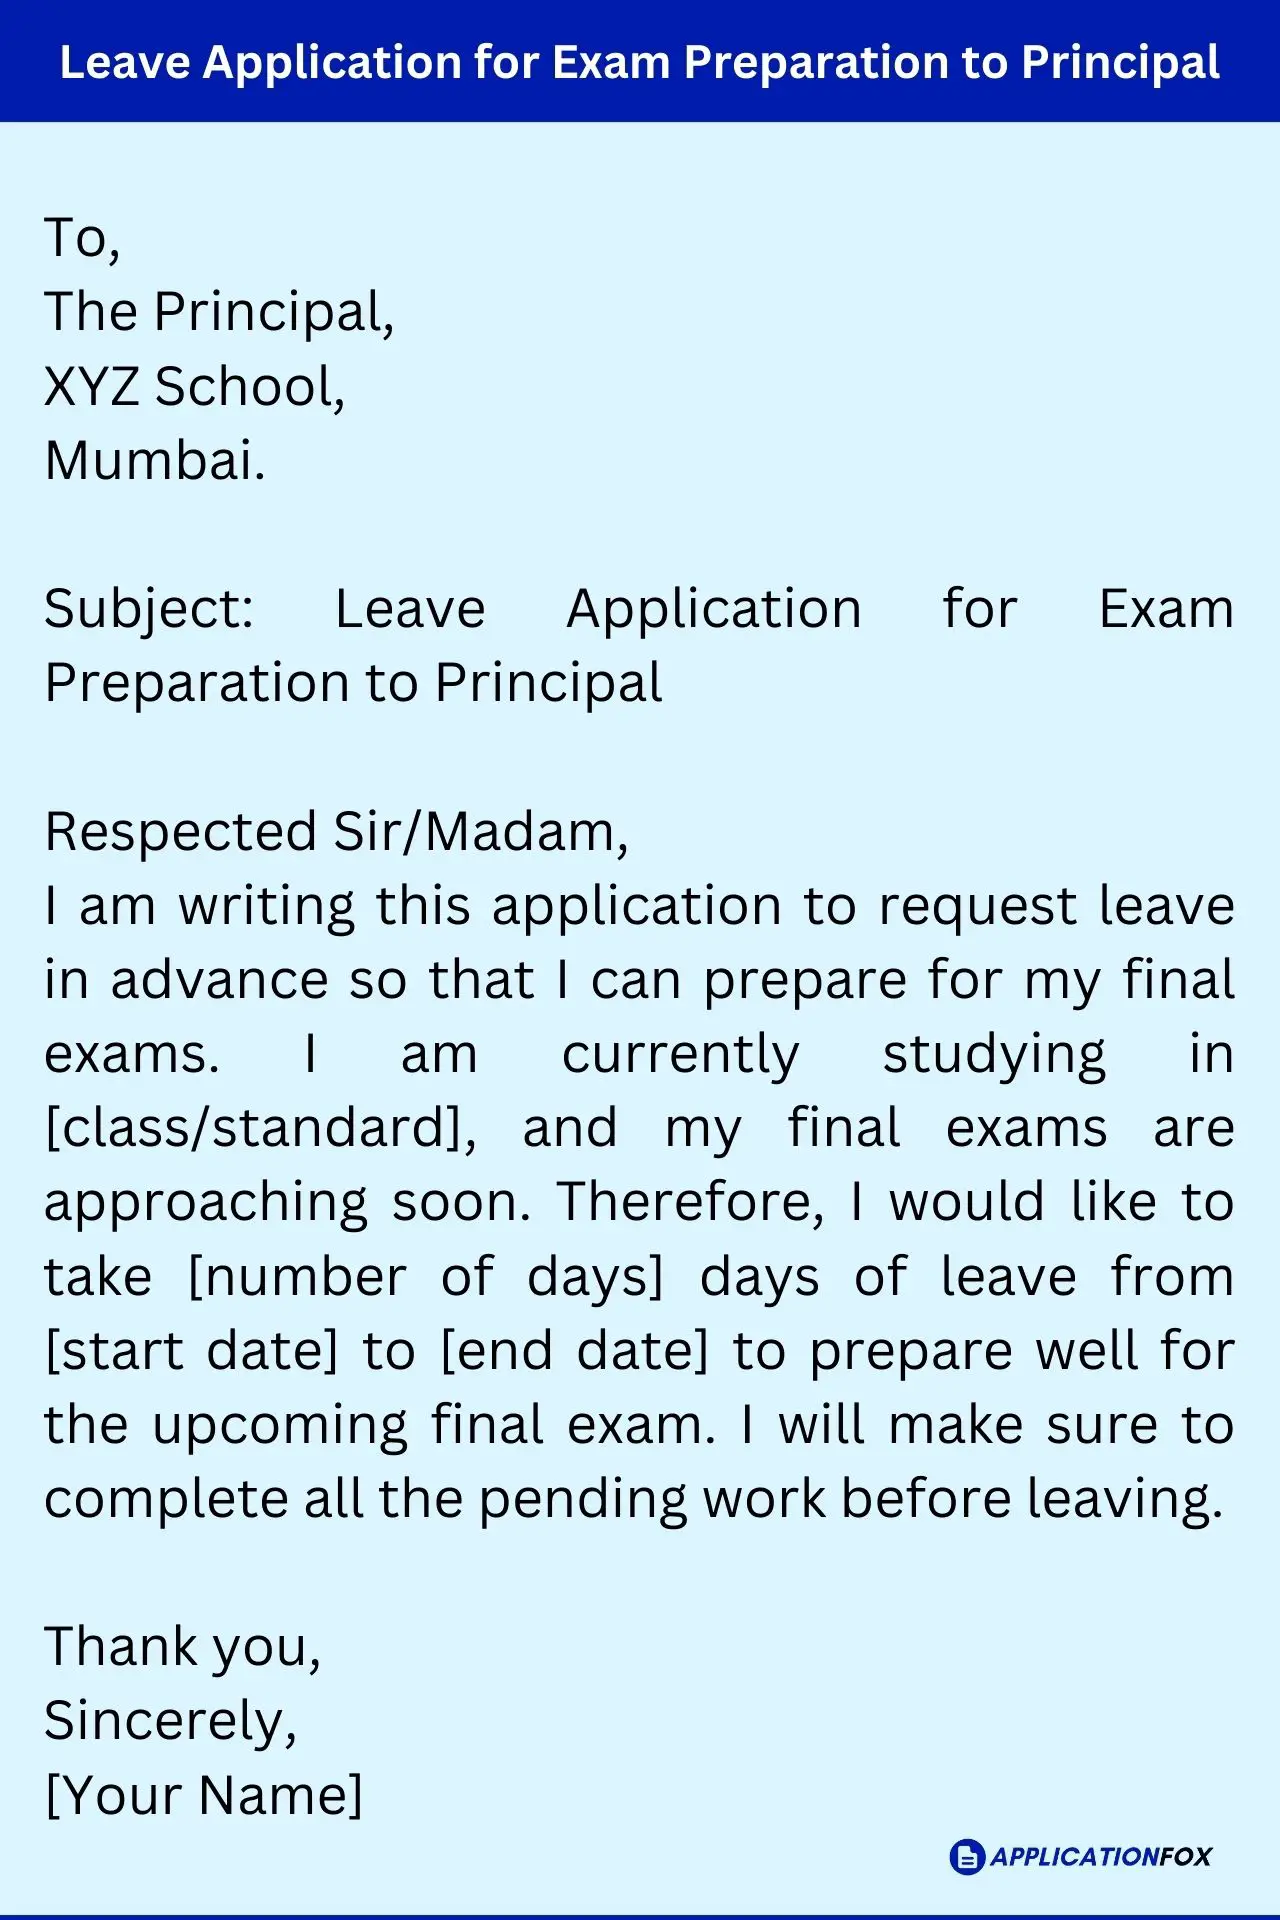 Leave Application for Exam Preparation to Principal